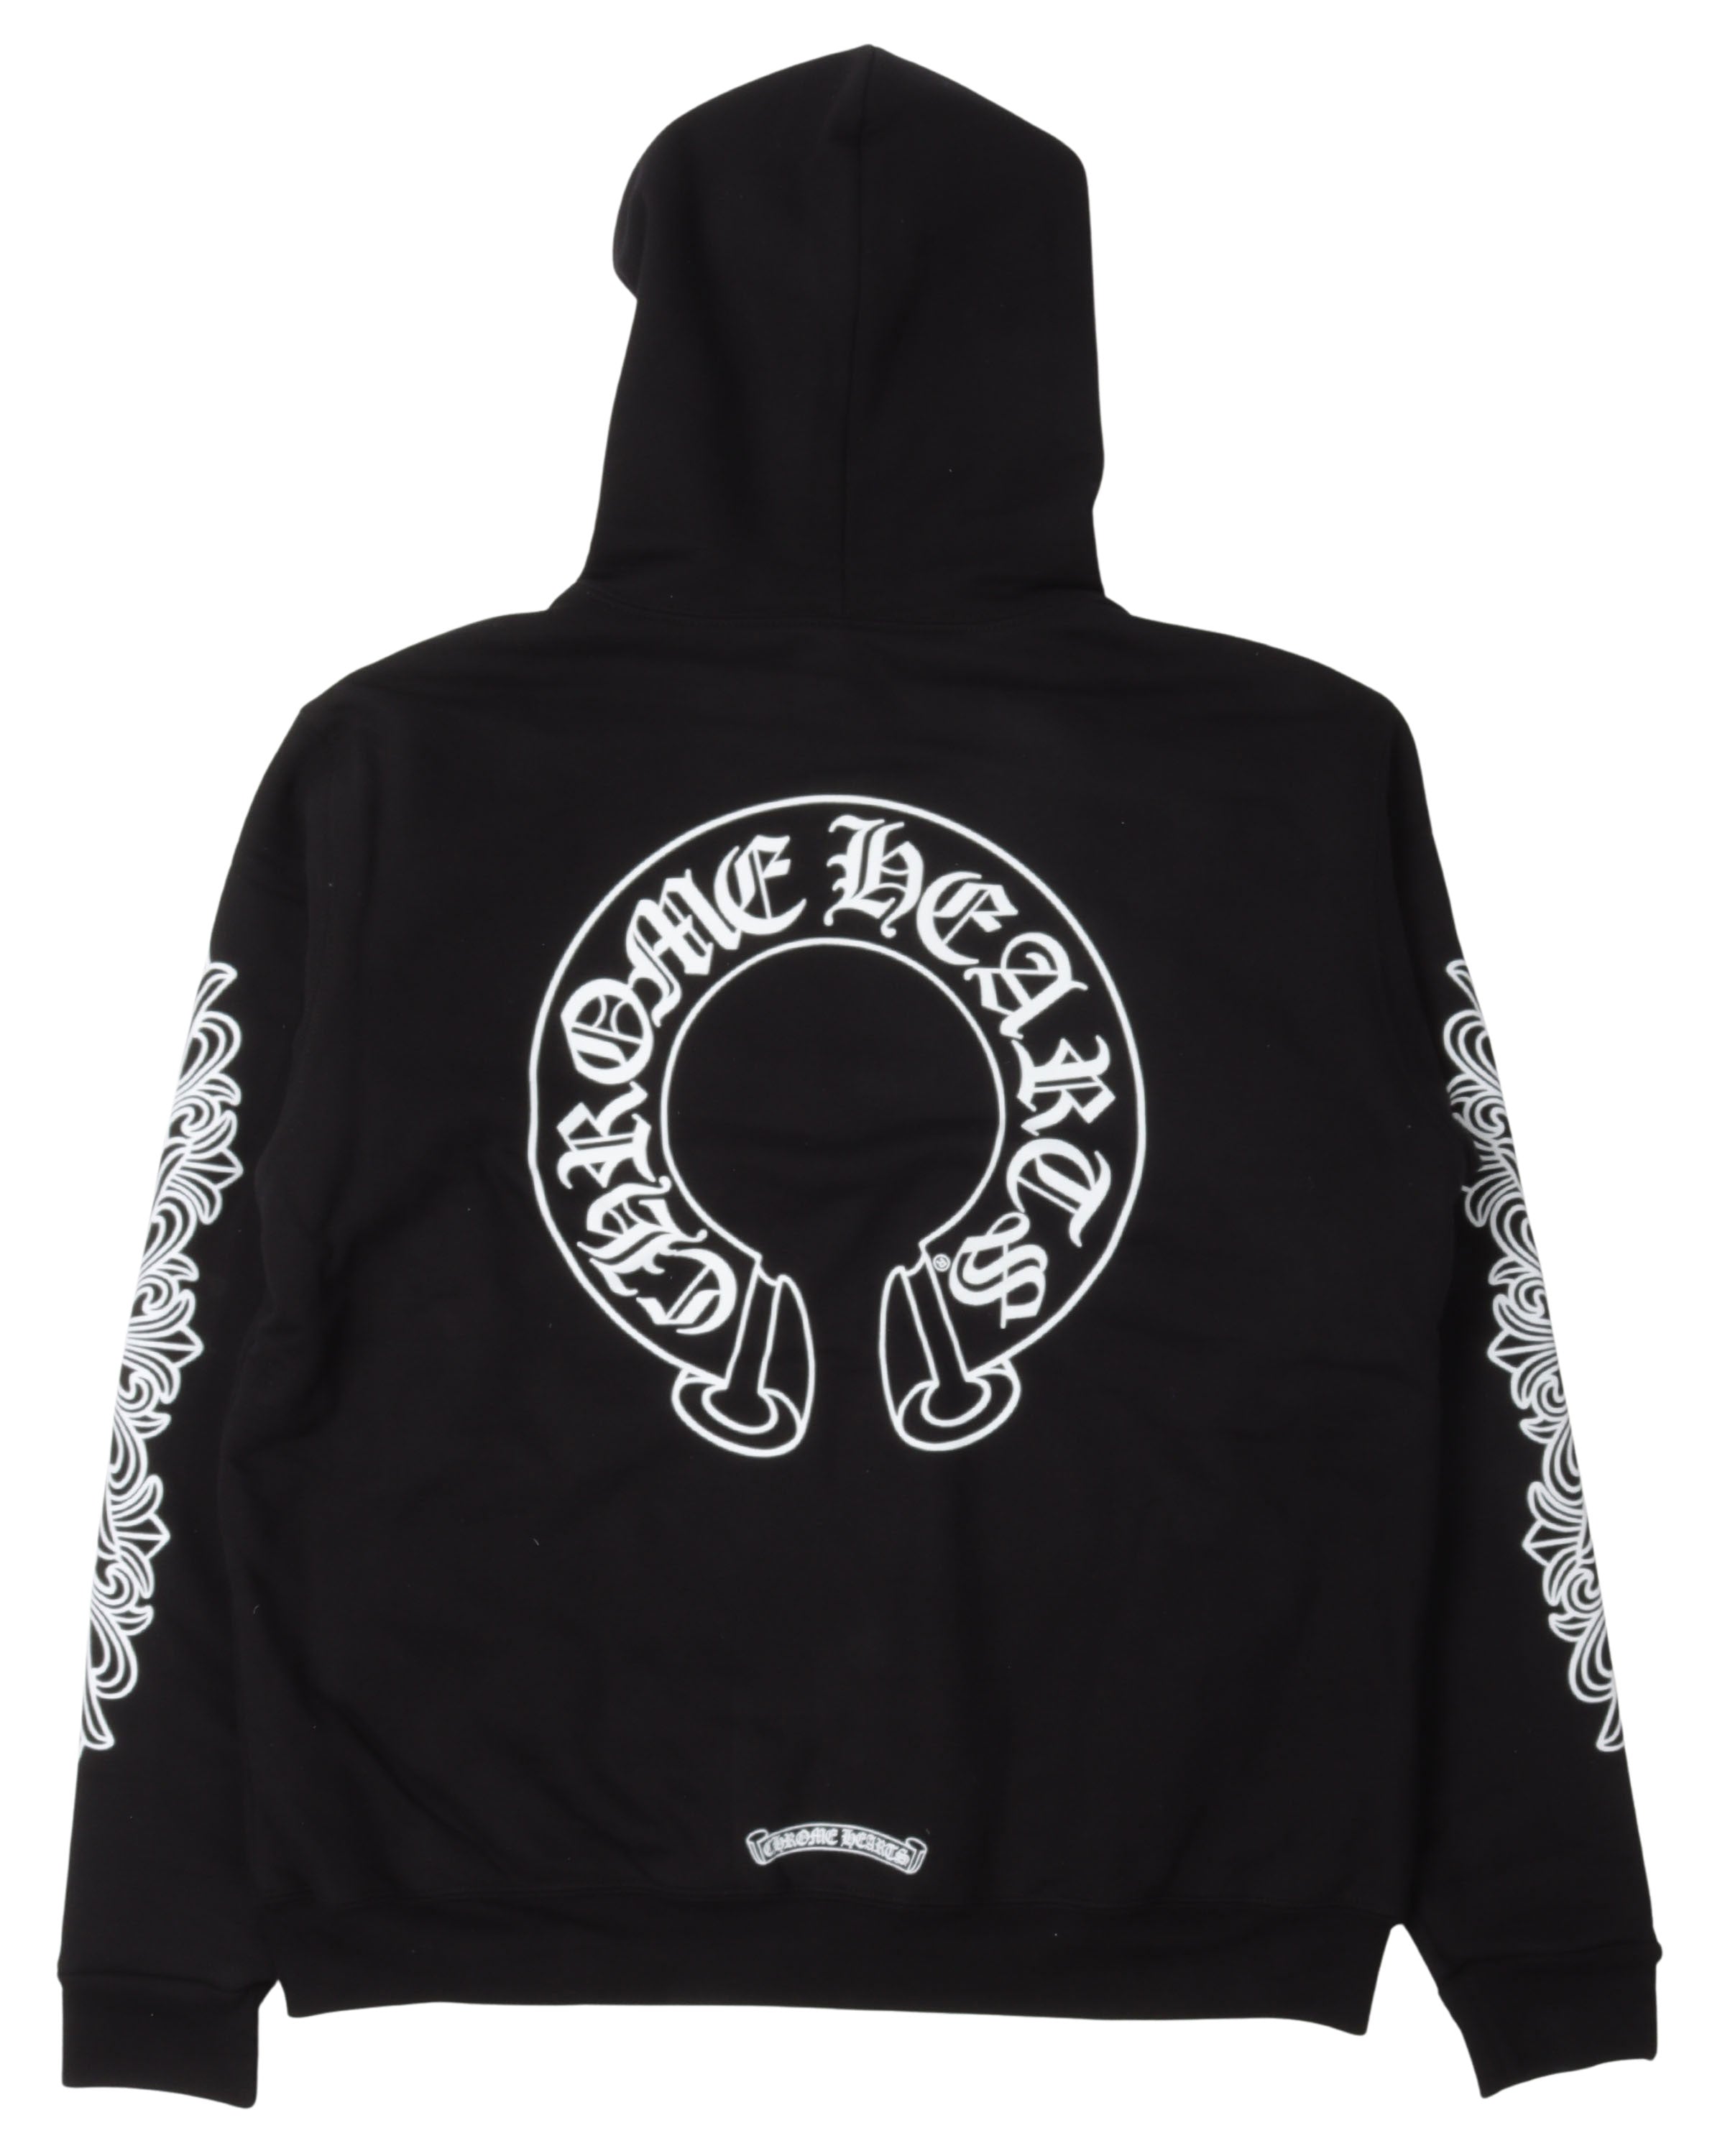 Chrome Hearts Horseshoe Thermal Lined Zip Up Hoodie